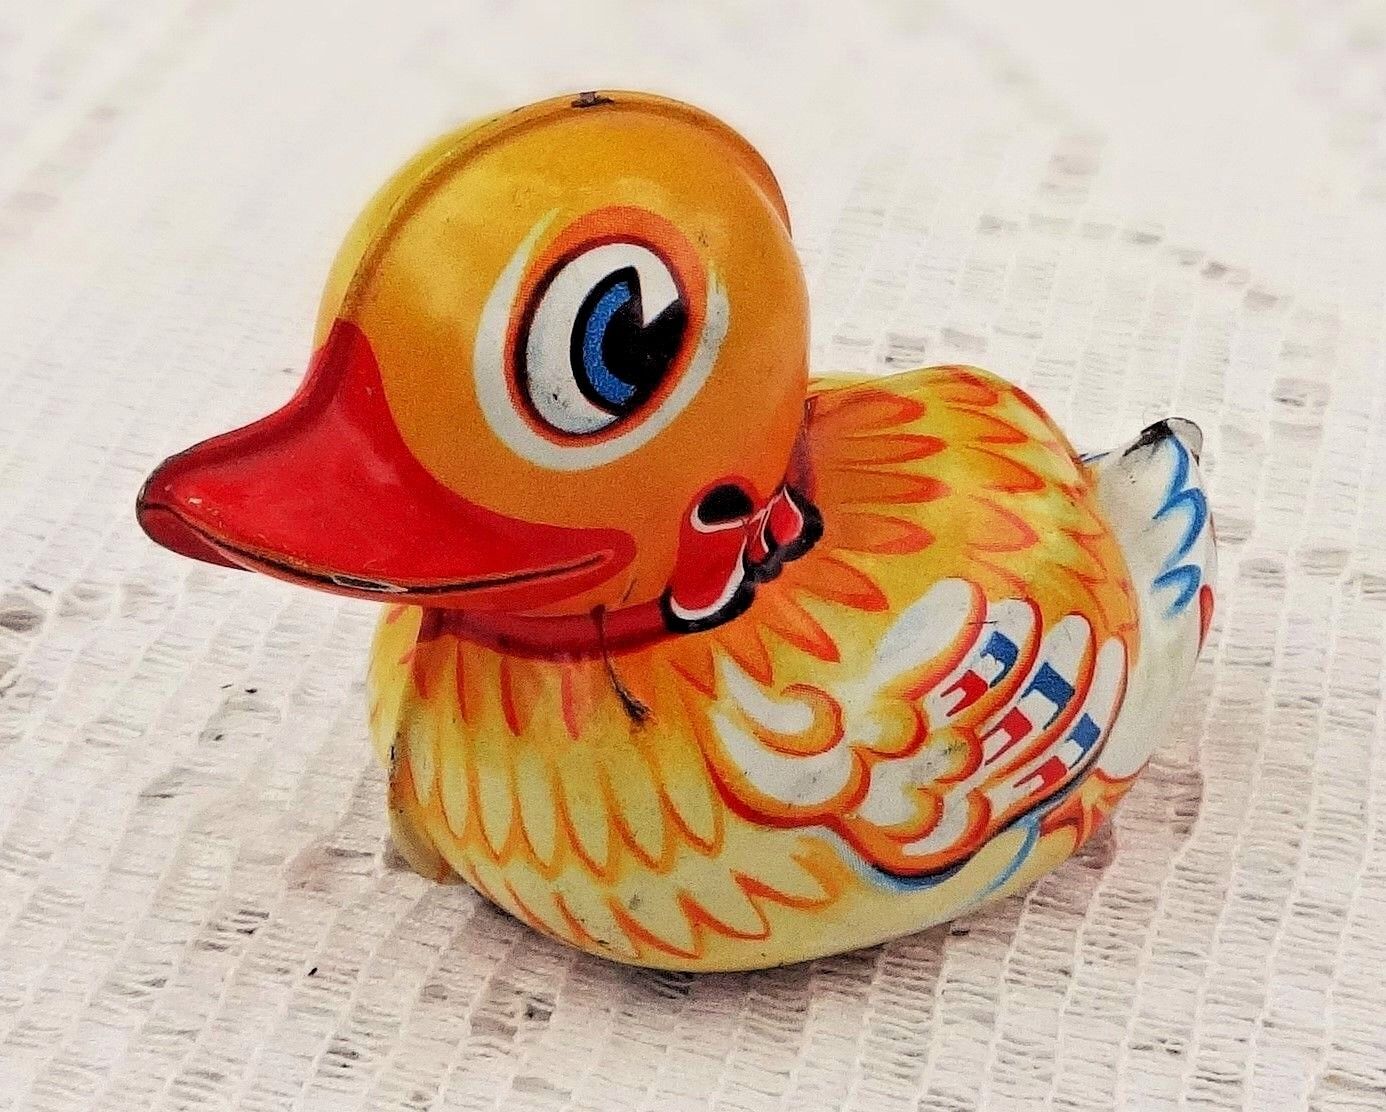 VINTAGE LEHMANN TIN LITHO DUCK FRICTION TOY - PAAK-PAAK 903 MADE IN WEST GERMANY